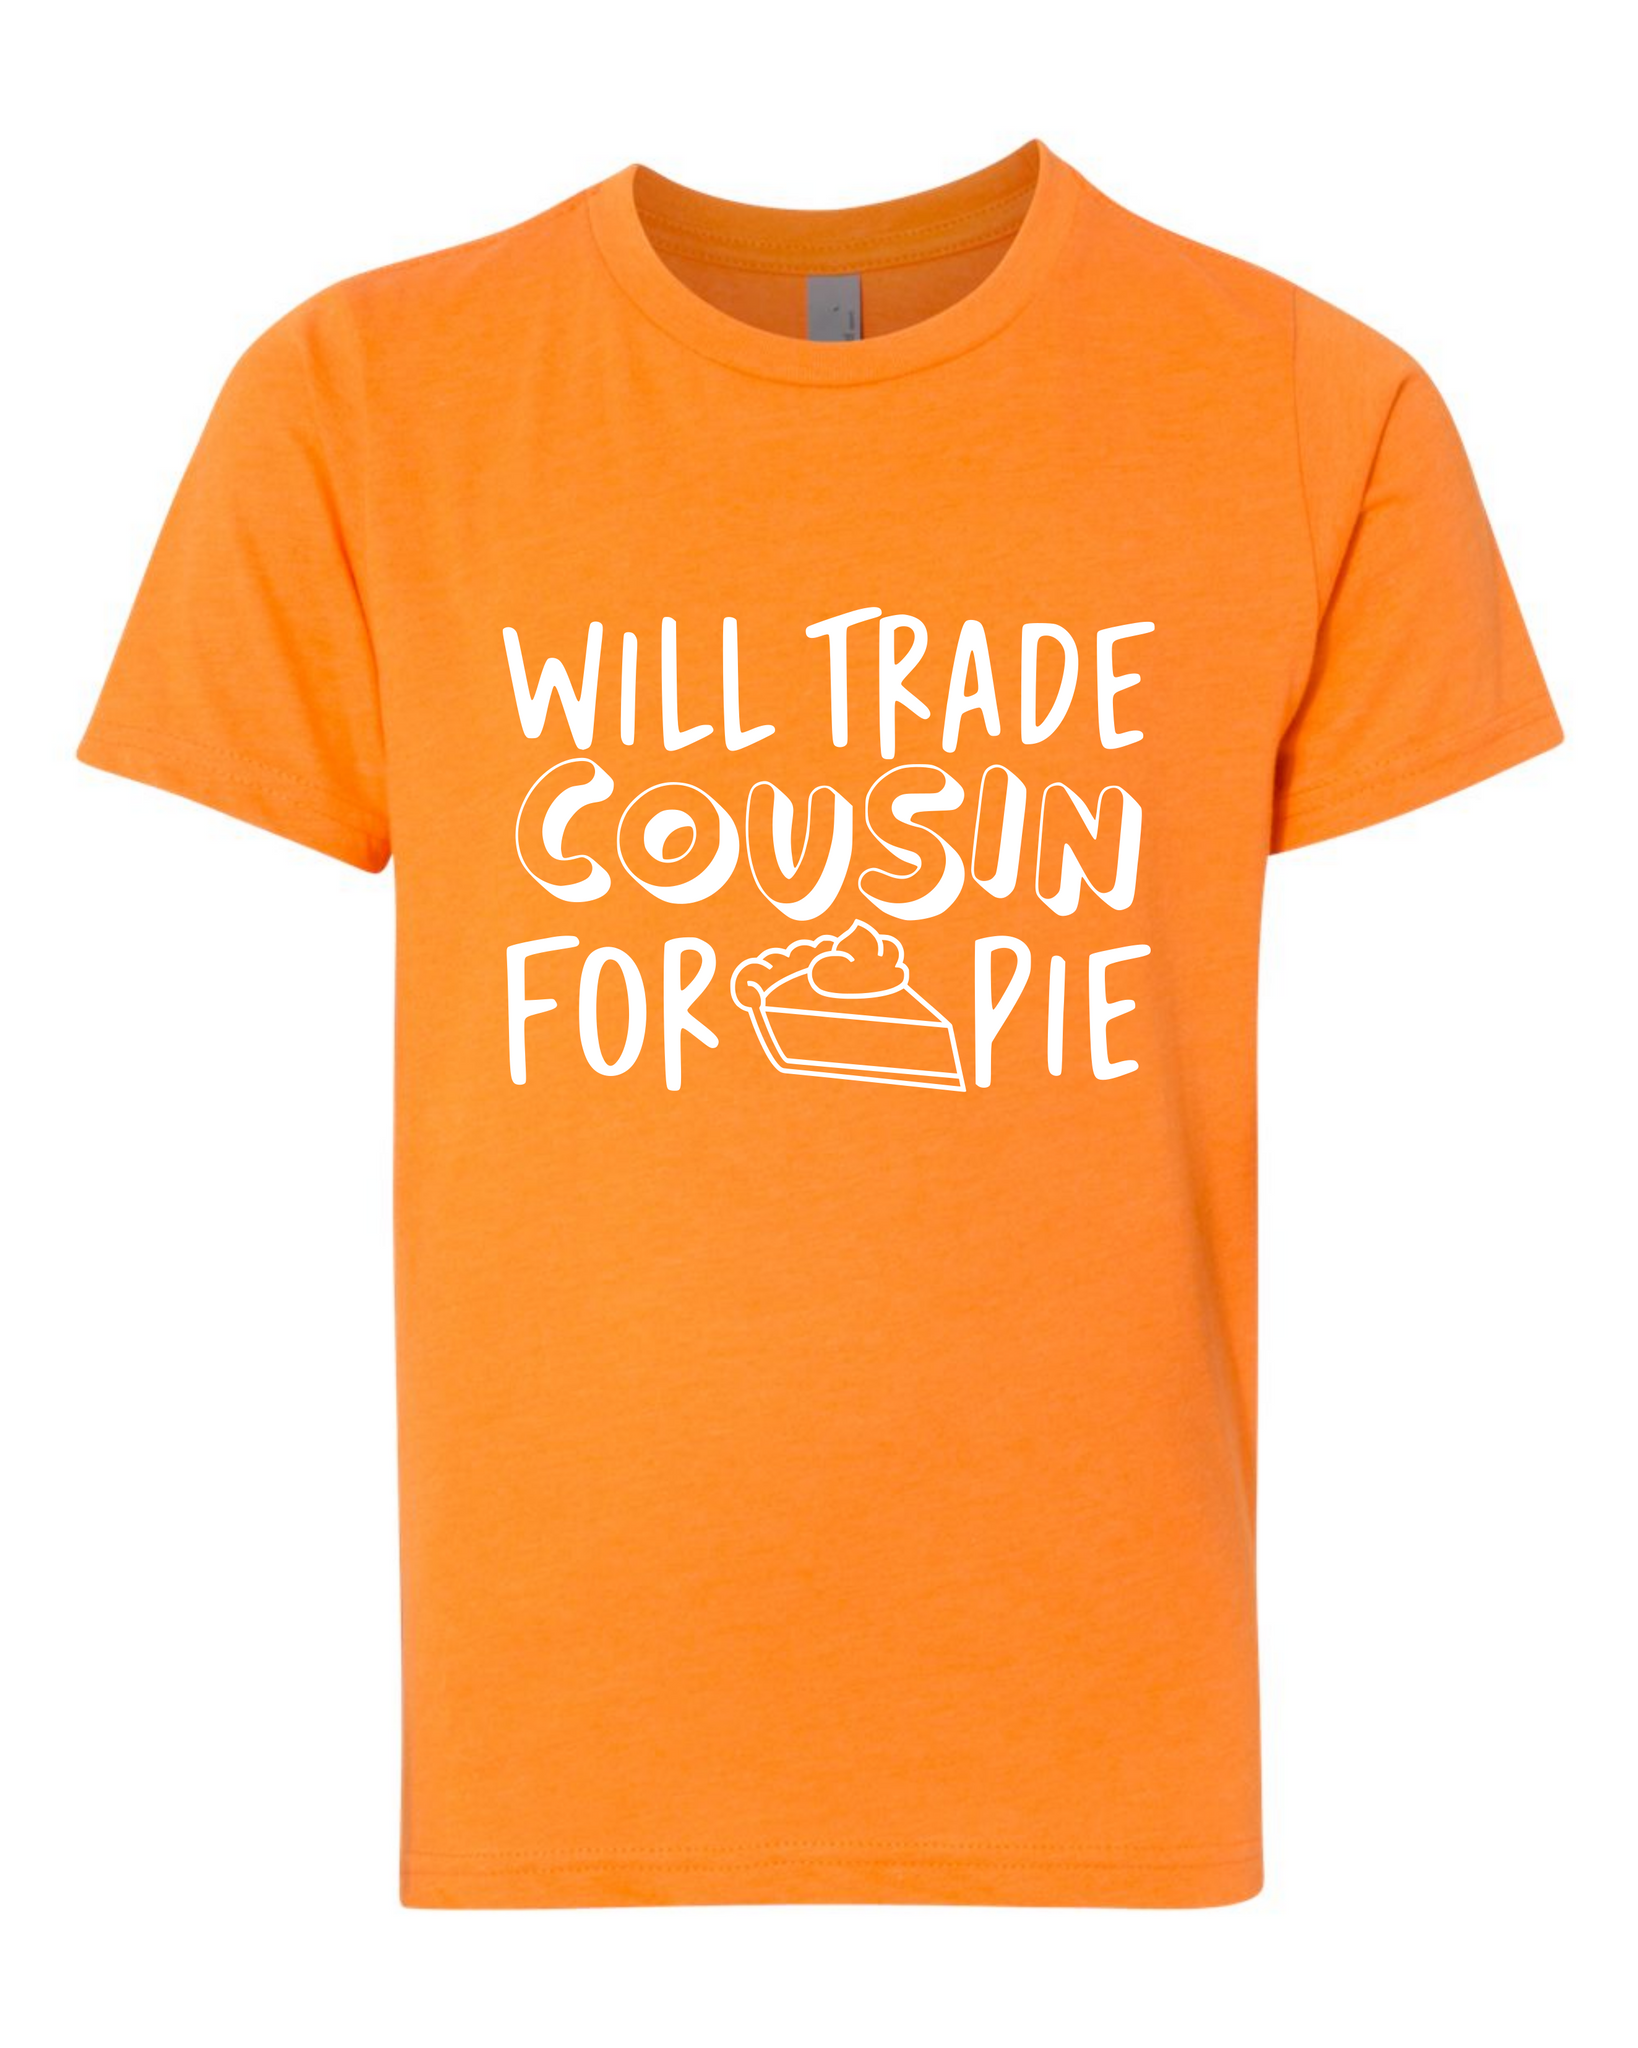 WILL TRADE COUSIN FOR PIE KIDS SHIRT